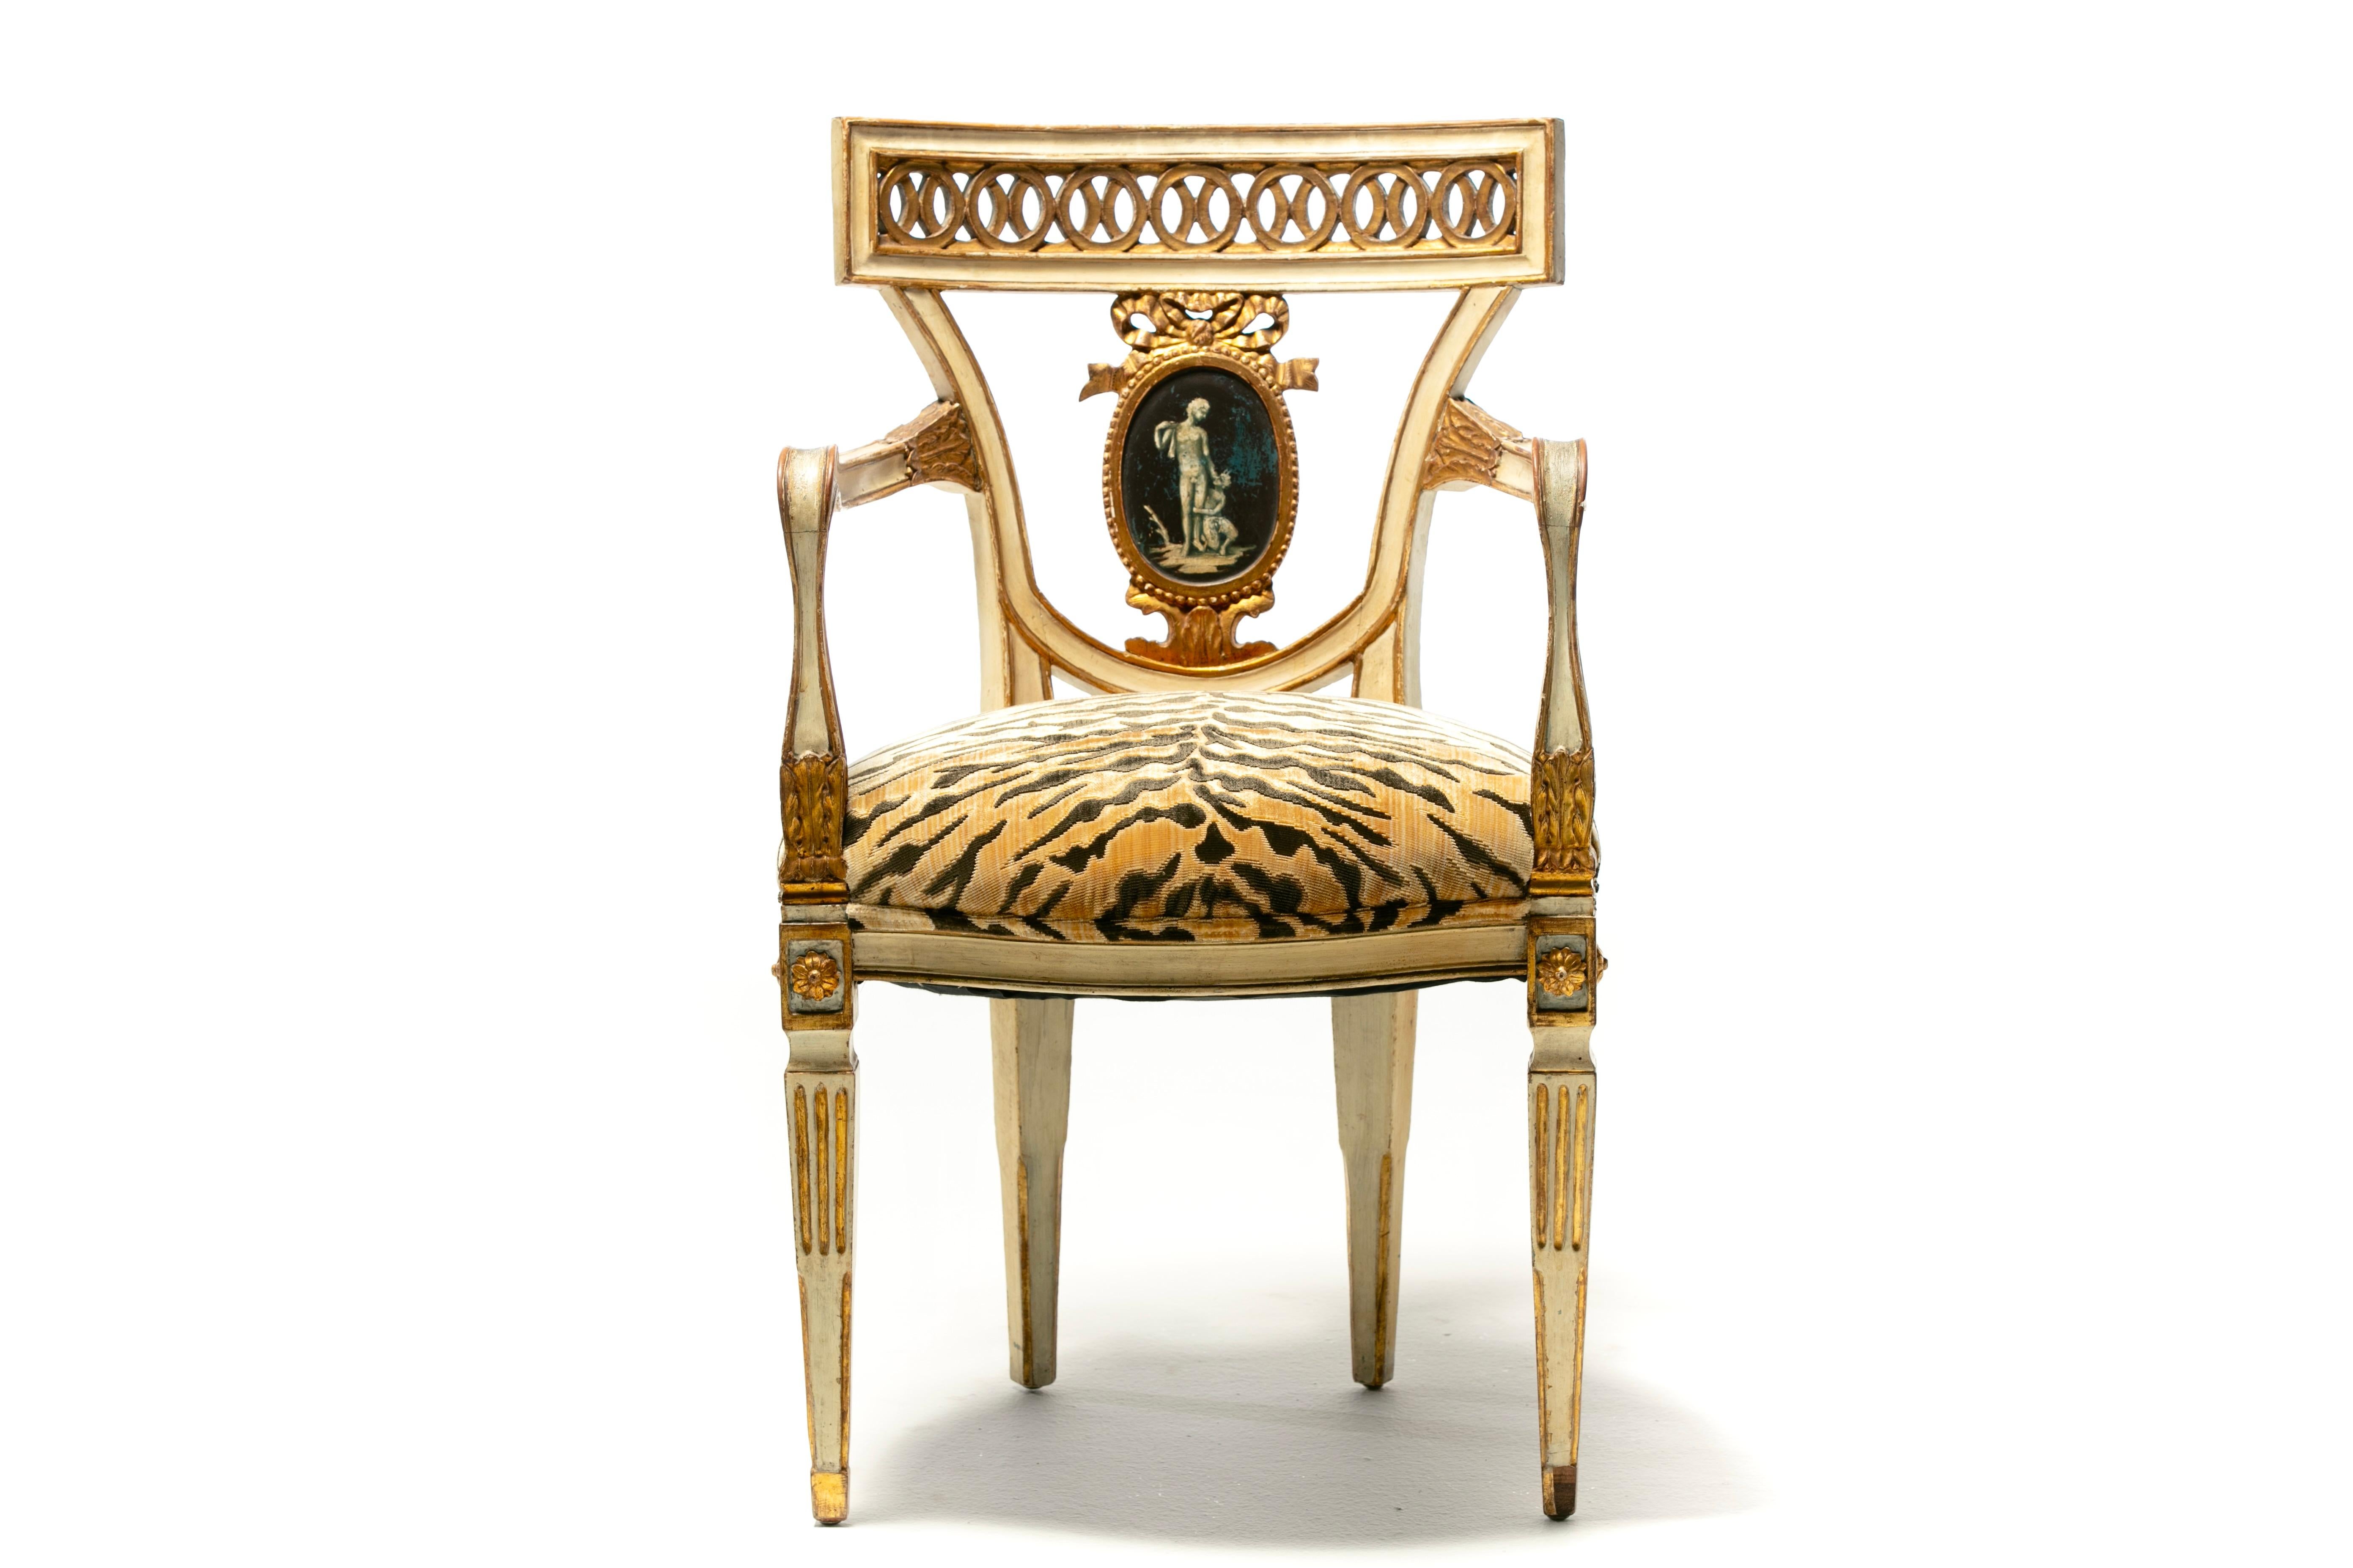 Set of 8 Italian Neoclassical Dining Chairs with Painted Murals & Tiger Velvet In Good Condition For Sale In Saint Louis, MO